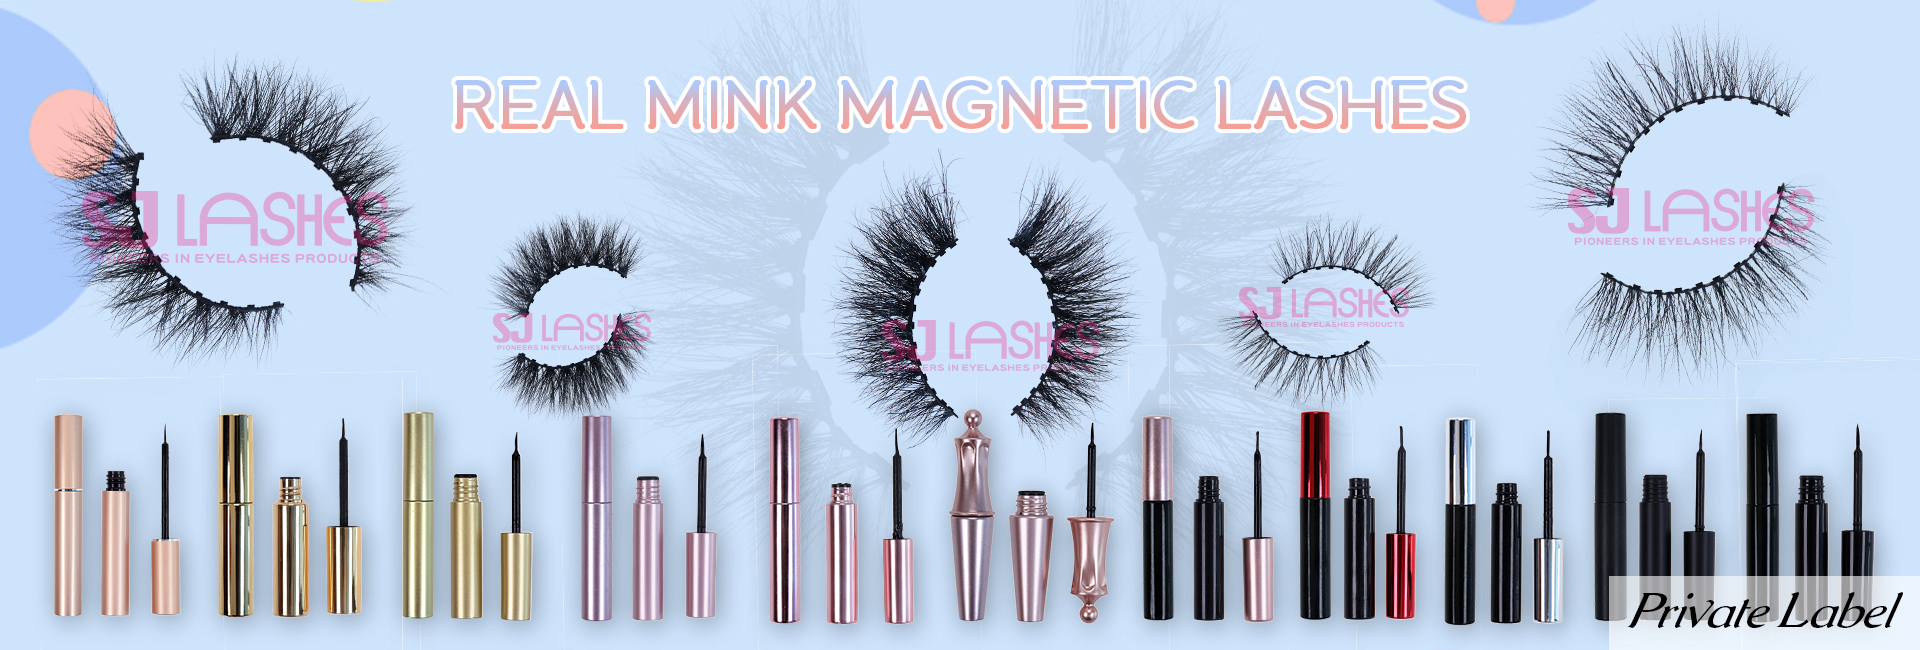 Real Mink Magnetic Lashes